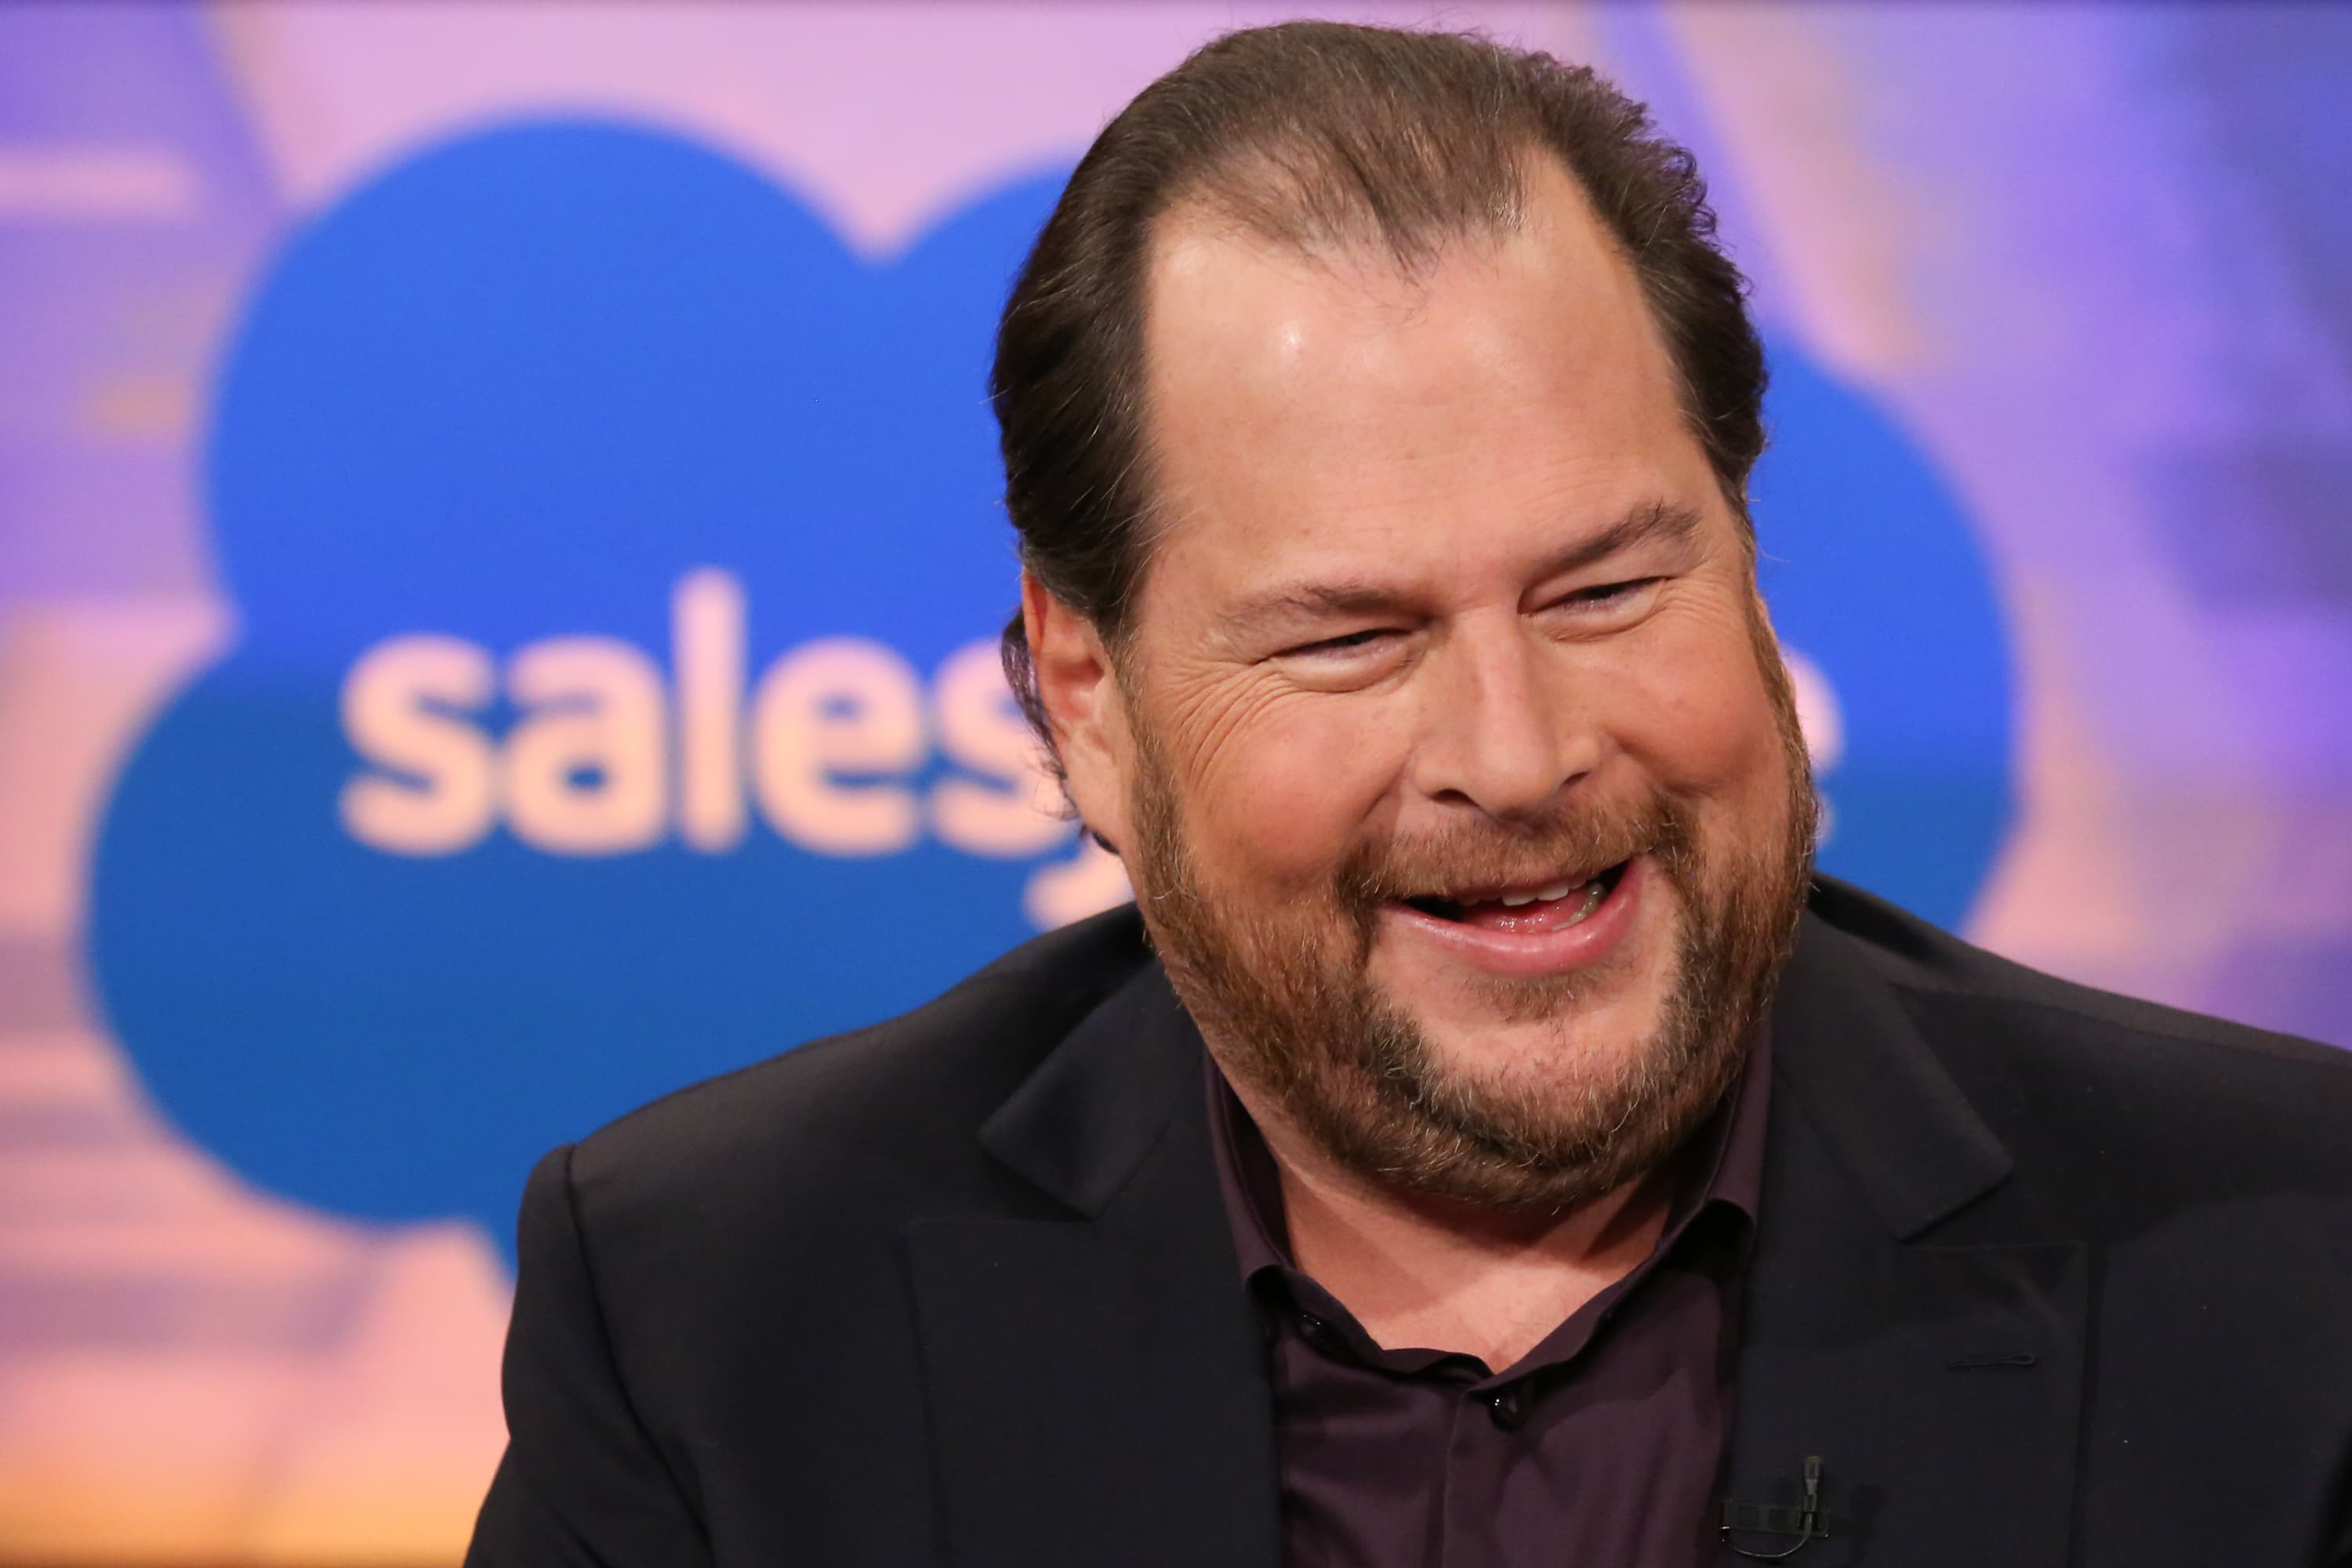 Salesforce growth accelerates as company offers strong guidance for coming fiscal year